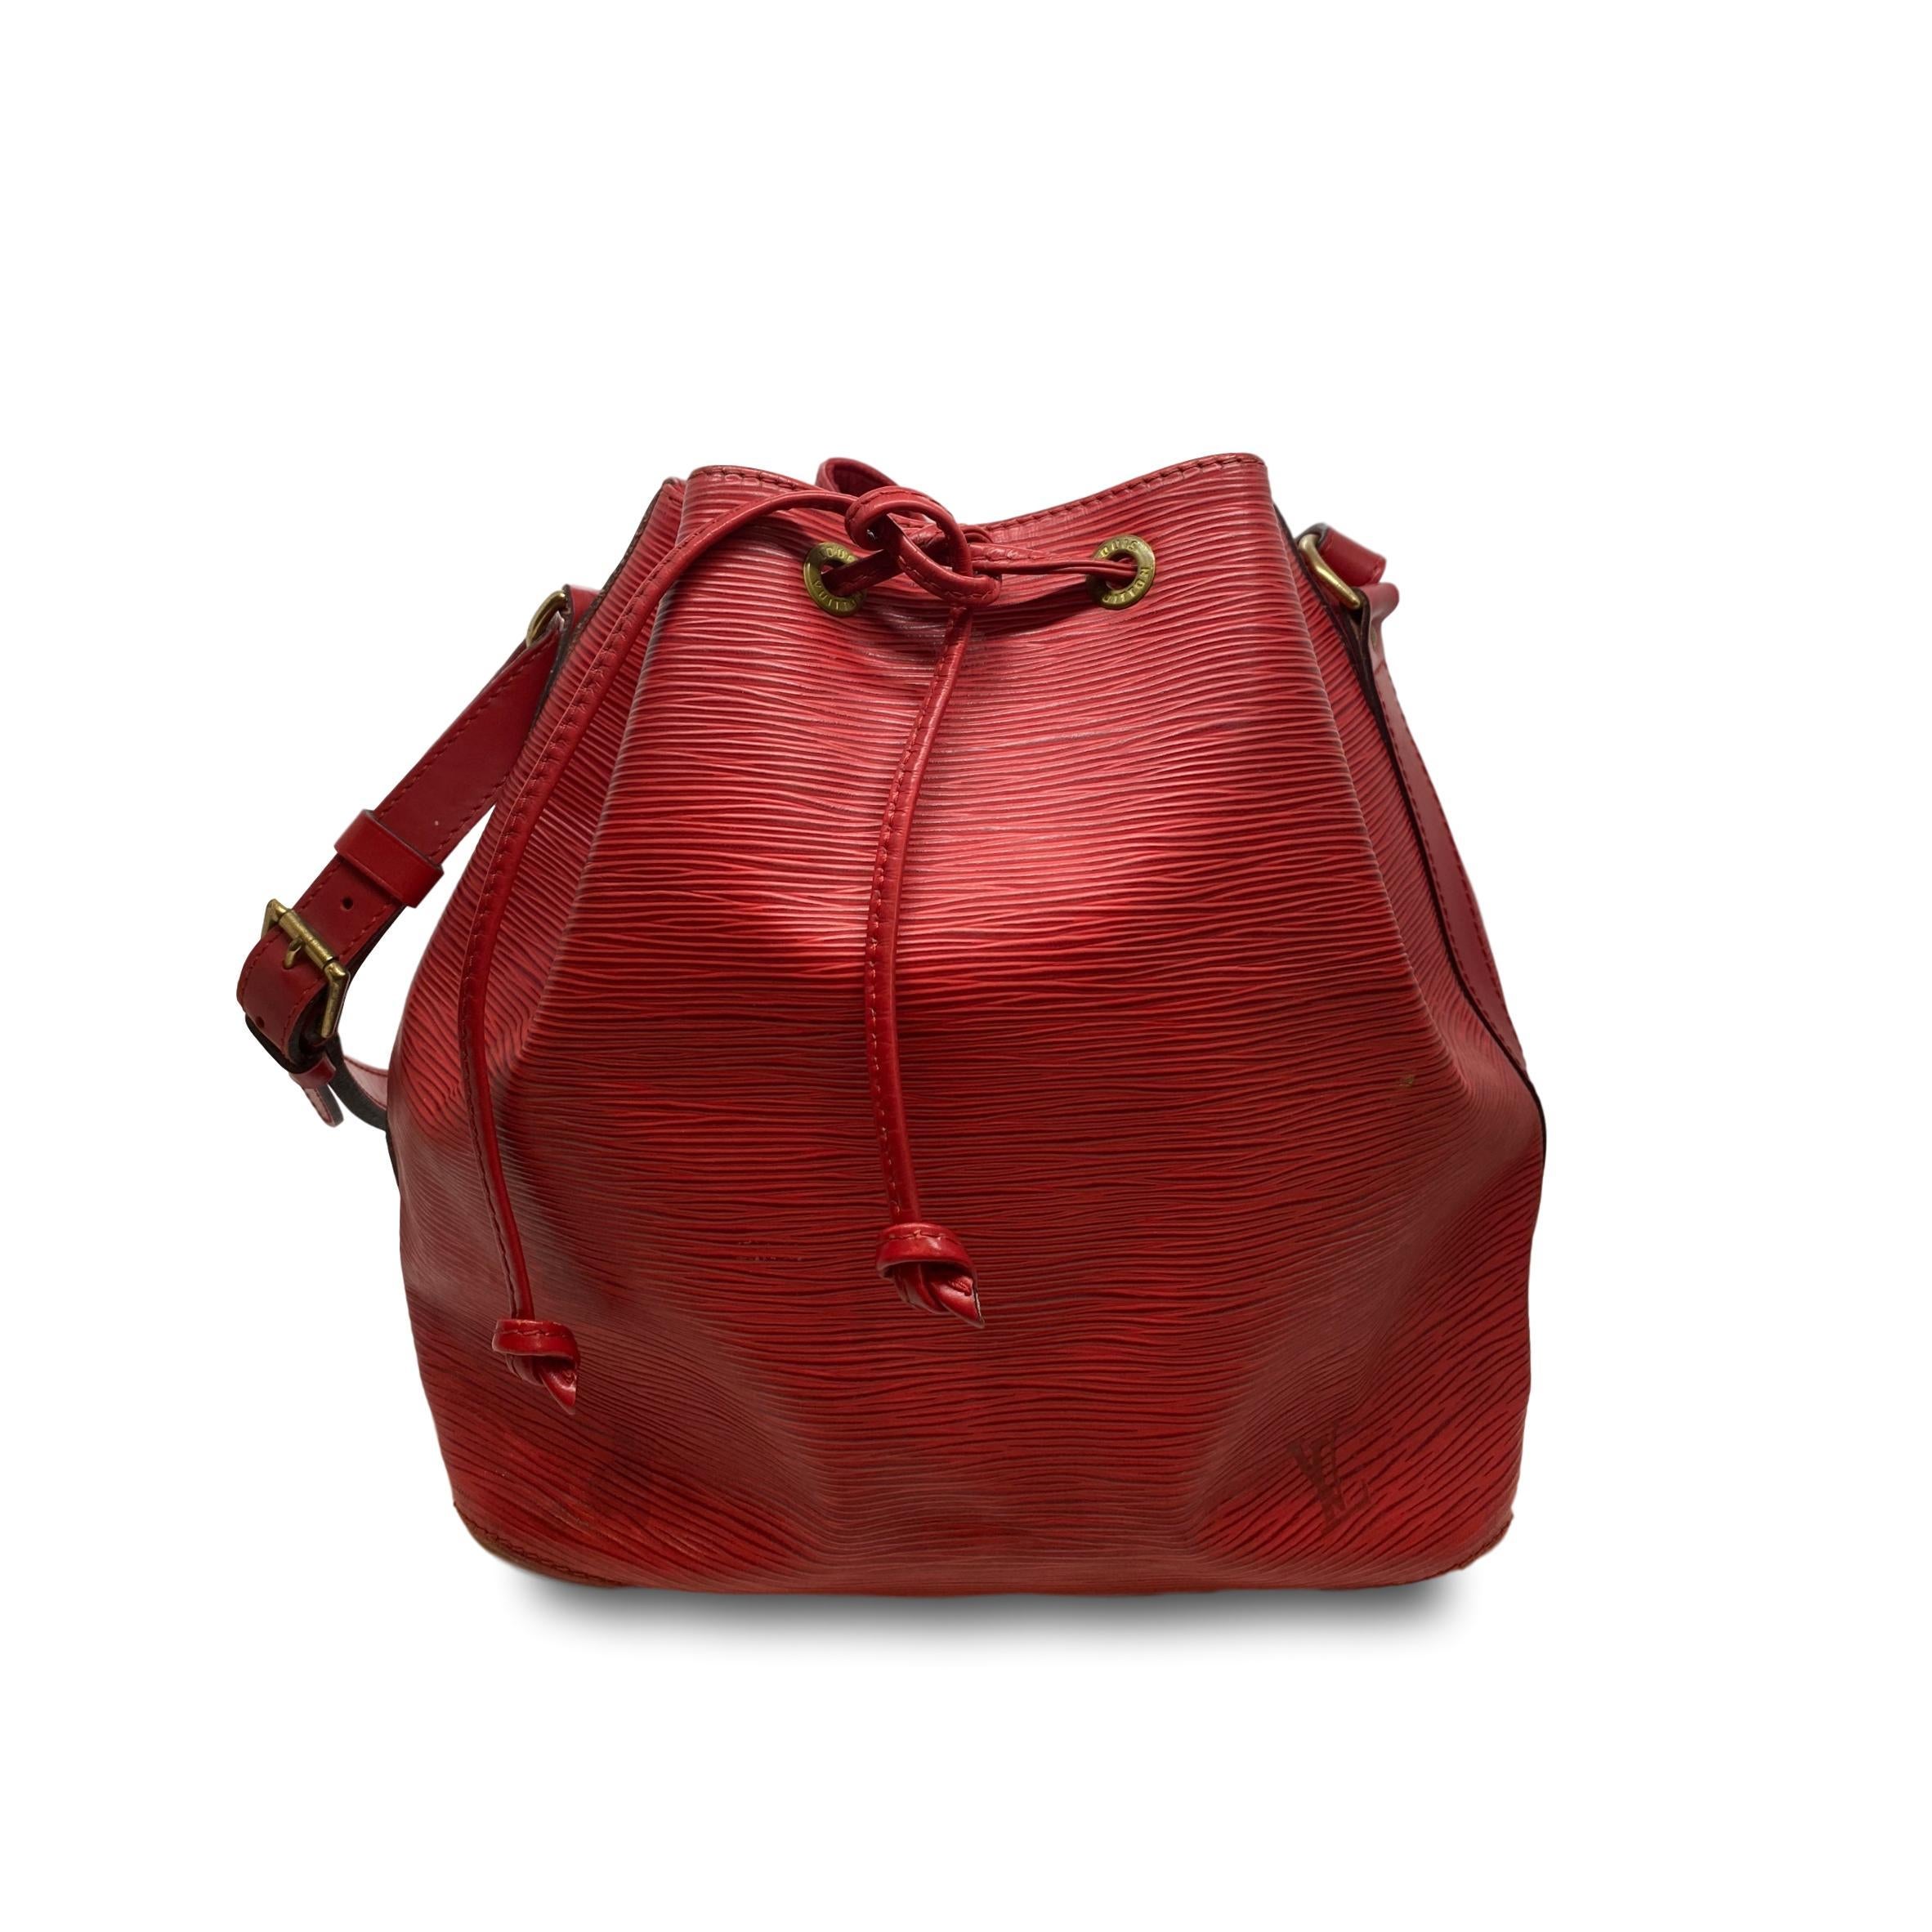 Vintage Louis Vuitton “Noe” PM Bucket Bag in Red EPI Leather, circa 1995. Made in France, the Noe was originally designed by Louis Vuitton’s grandson in 1932 as a bag to carry champagne, specifically four bottles upright and one inverted in the